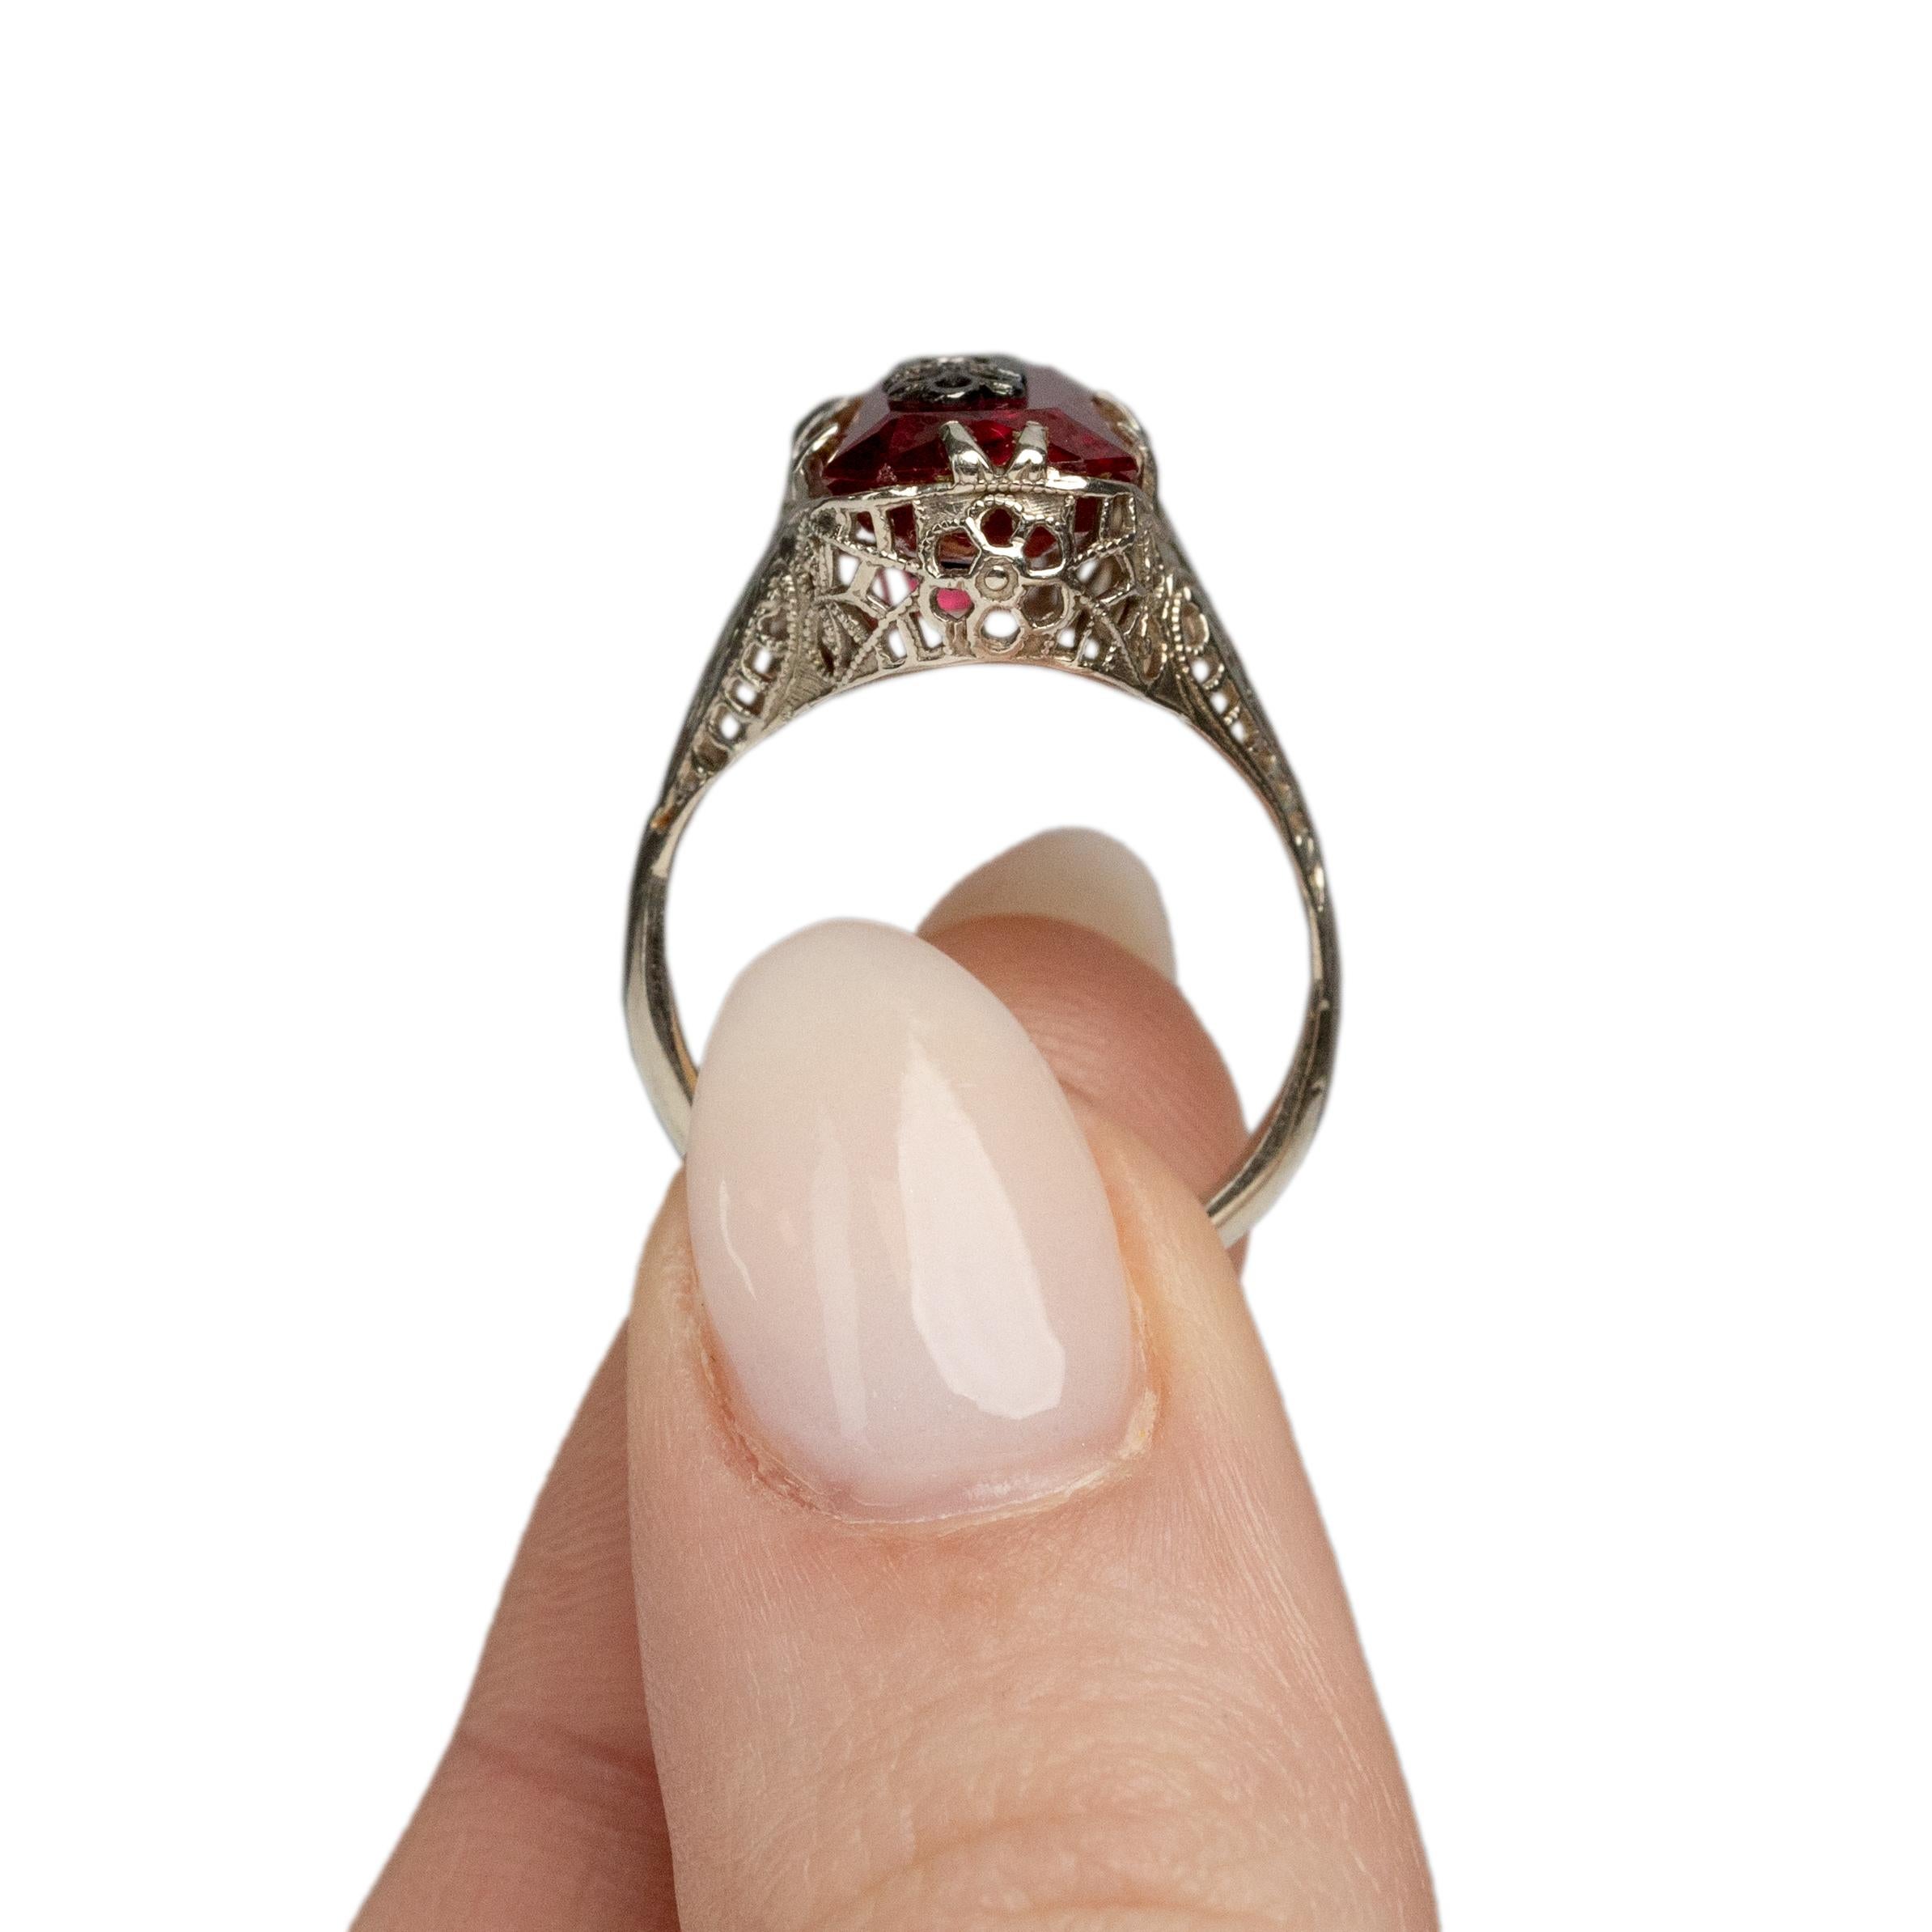 Victorian 14K White Gold Antique Filigree and Red Stone Statement Ring 1